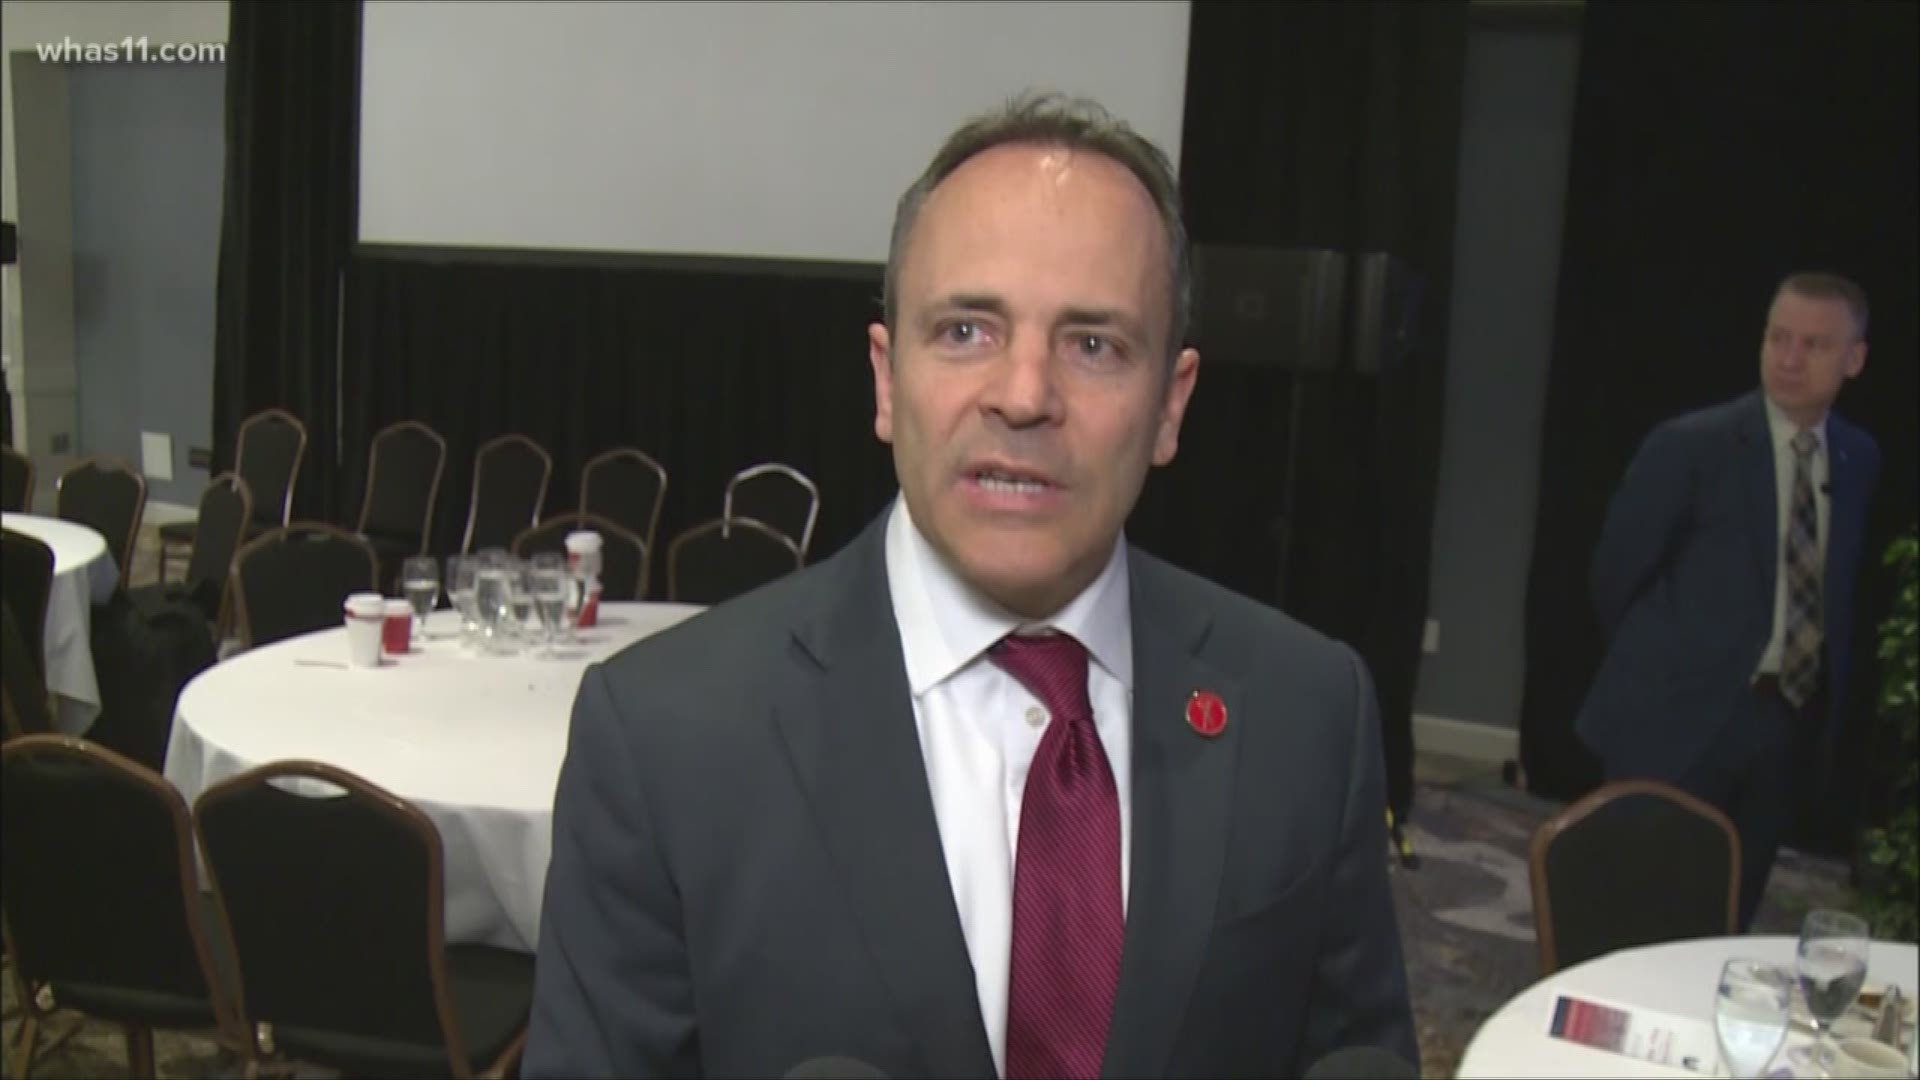 A challenge from Governor Matt Bevin to Kentucky faith communities, "step up" and help foster kids. On March 18, hundreds gathered at the annual prayer breakfast; afterward, he answered a question by Political Editor Chris Williams, with a question in return, "What are people going to church for?"